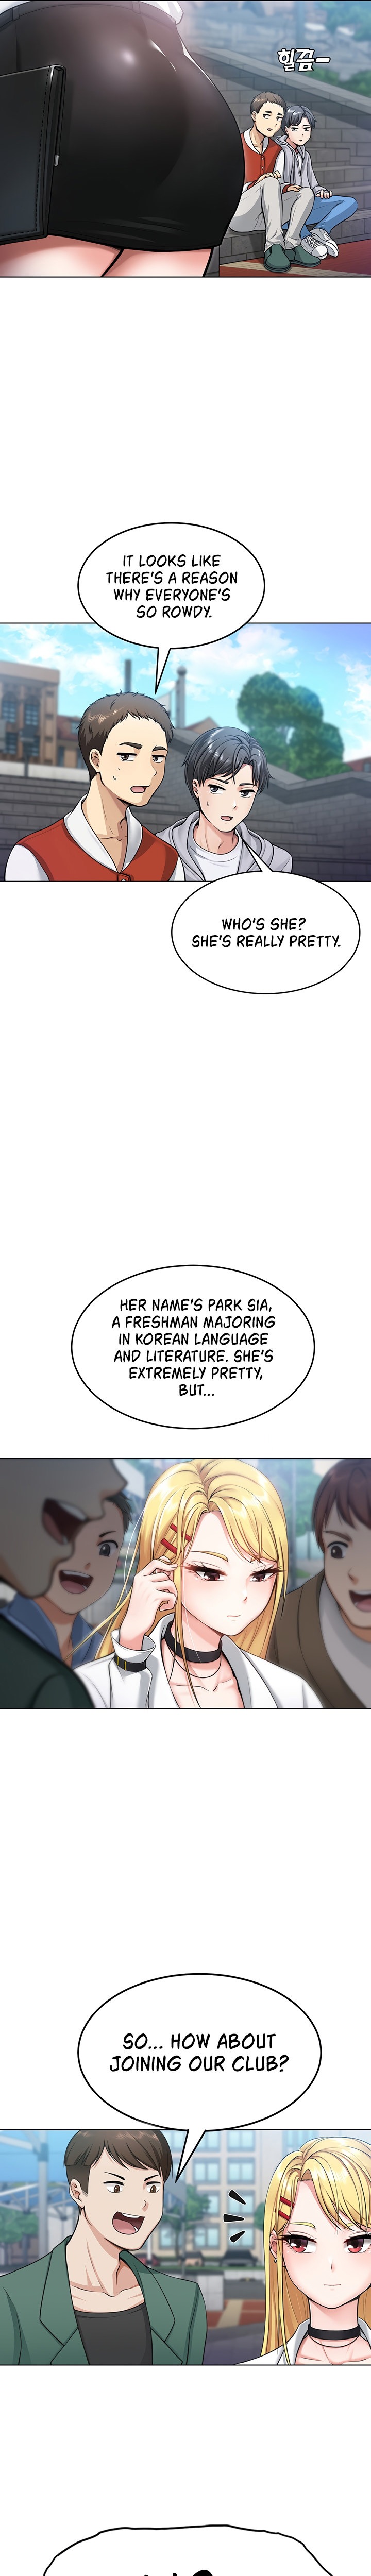 Seoul Kids These Days - Chapter 1 Page 4